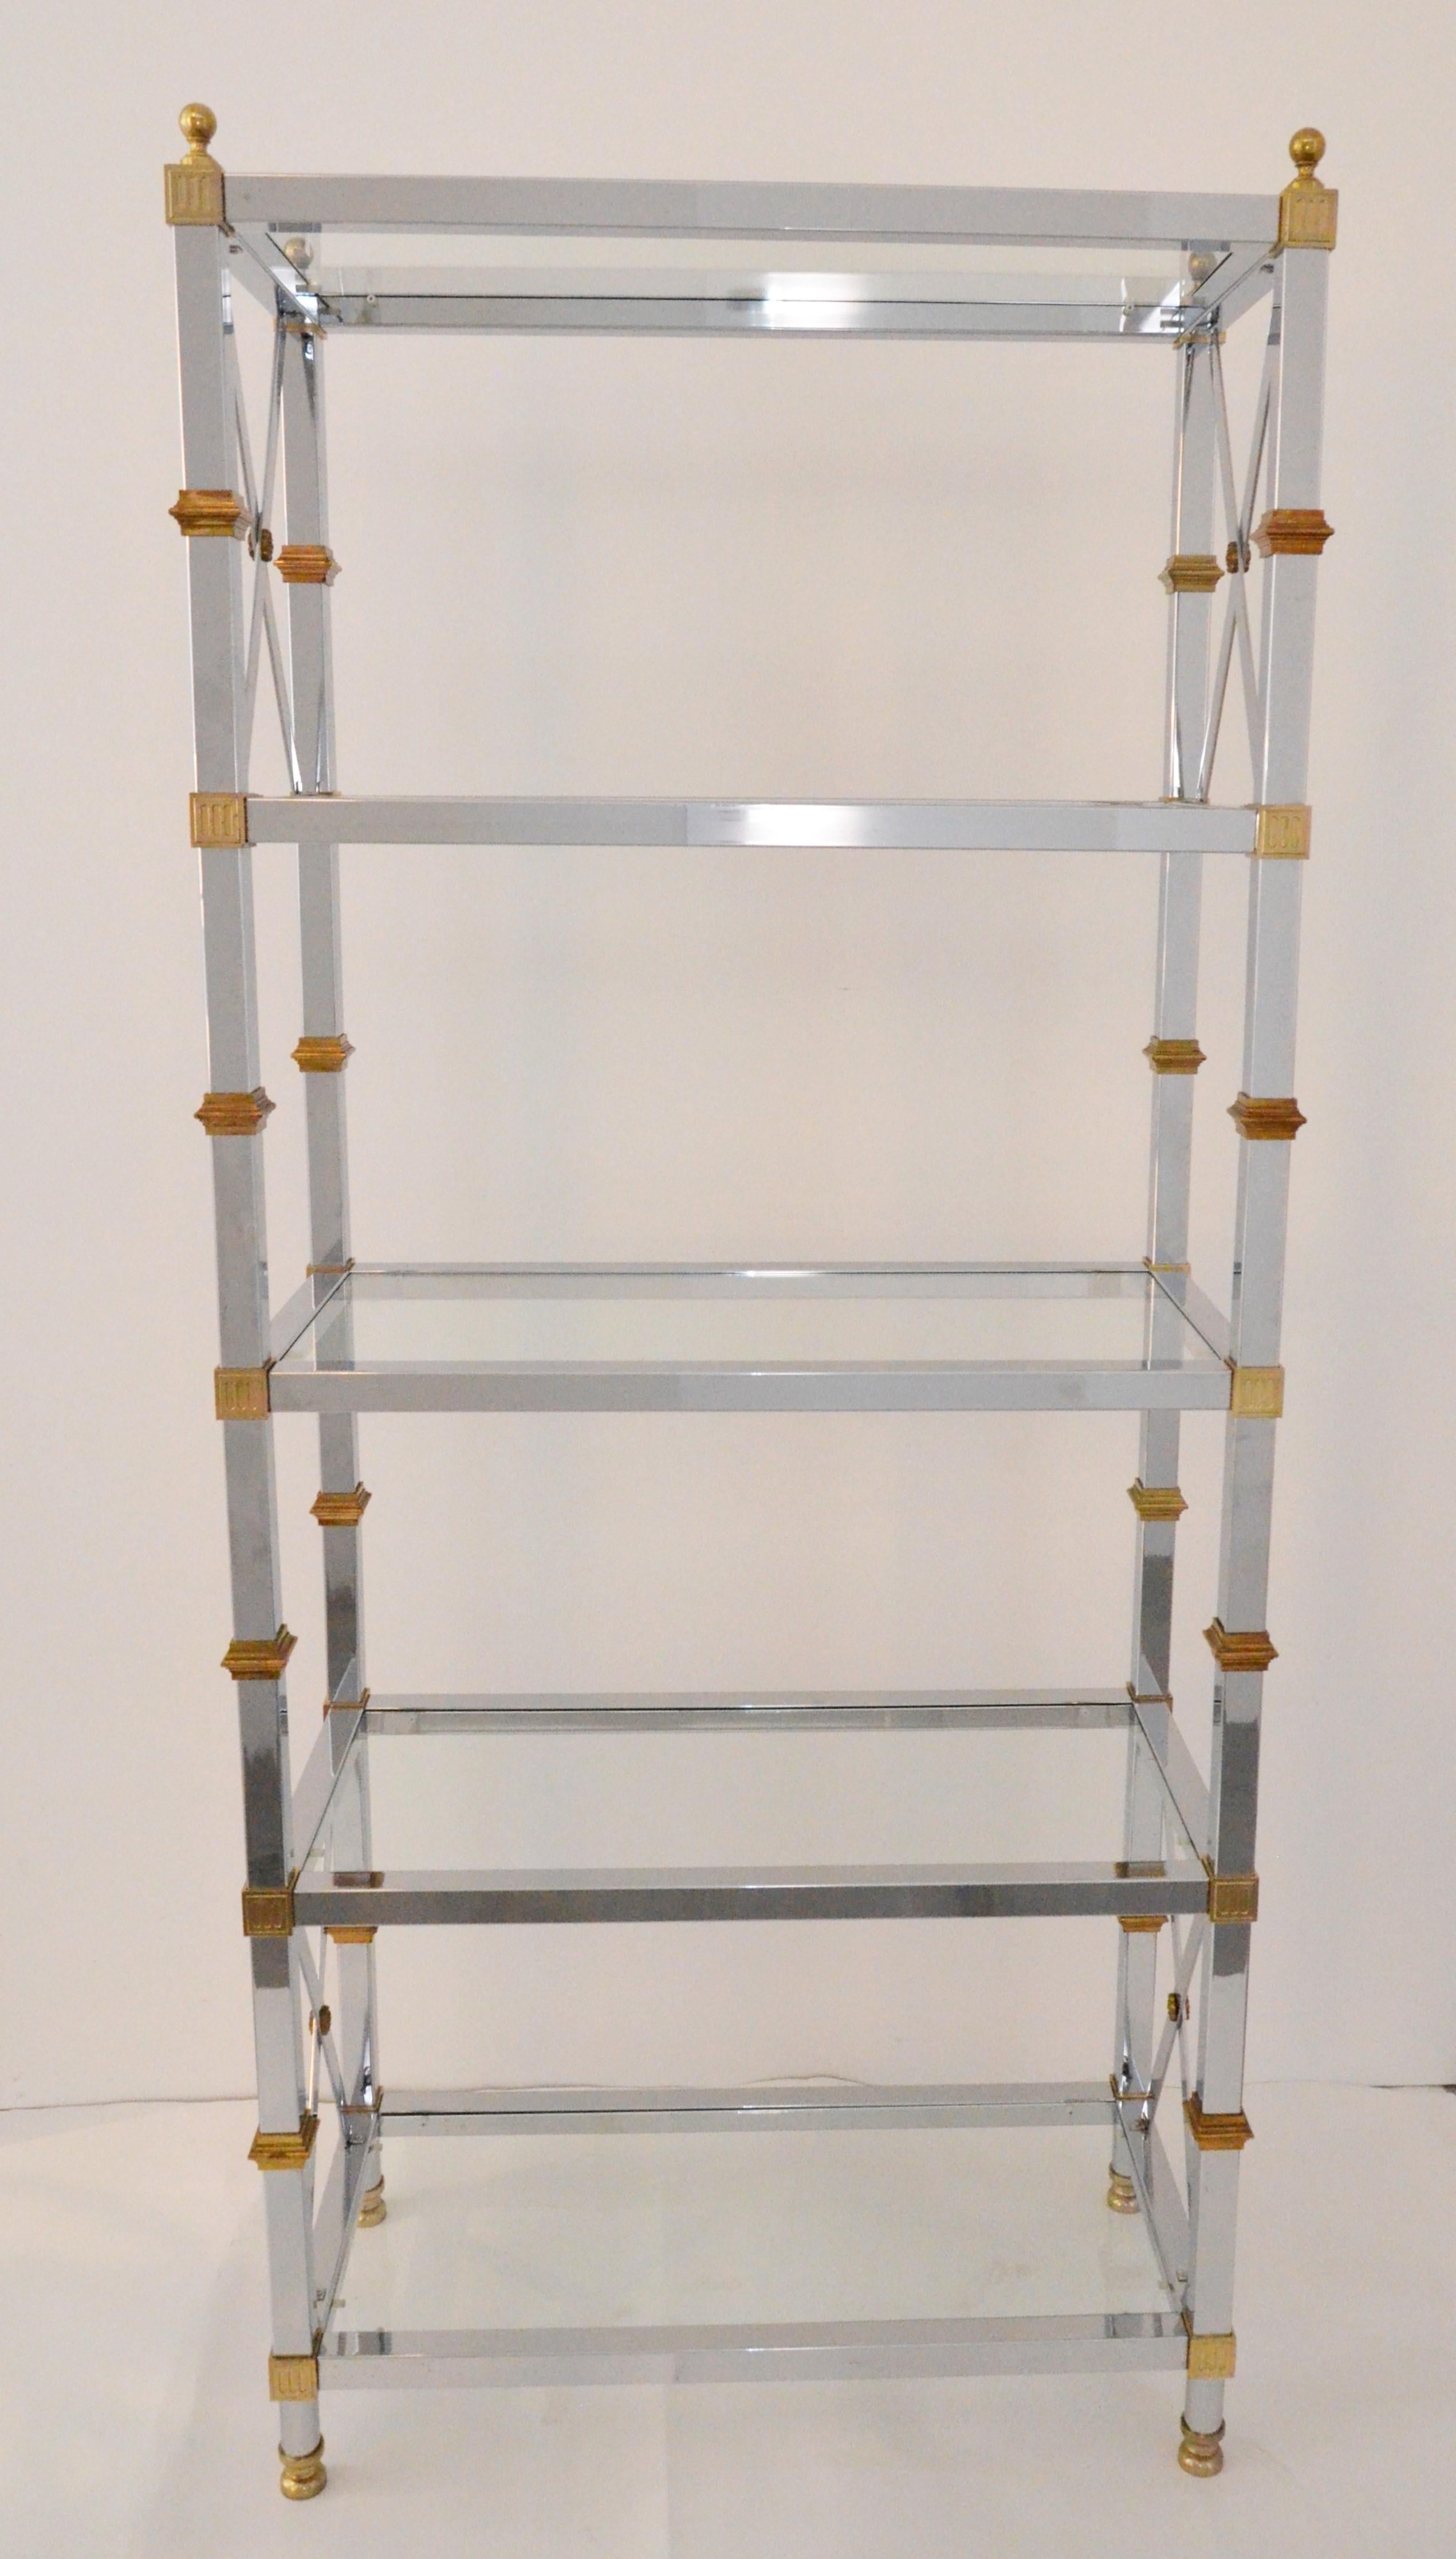 Offered is a Mid-Century Modern brass, chrome and five-glass shelf Regency style Hollywood Glam étagère. This shiny chrome and glass étagère has decorative brass accents and brass ball finials. This piece is incredibly versatile and could perform so